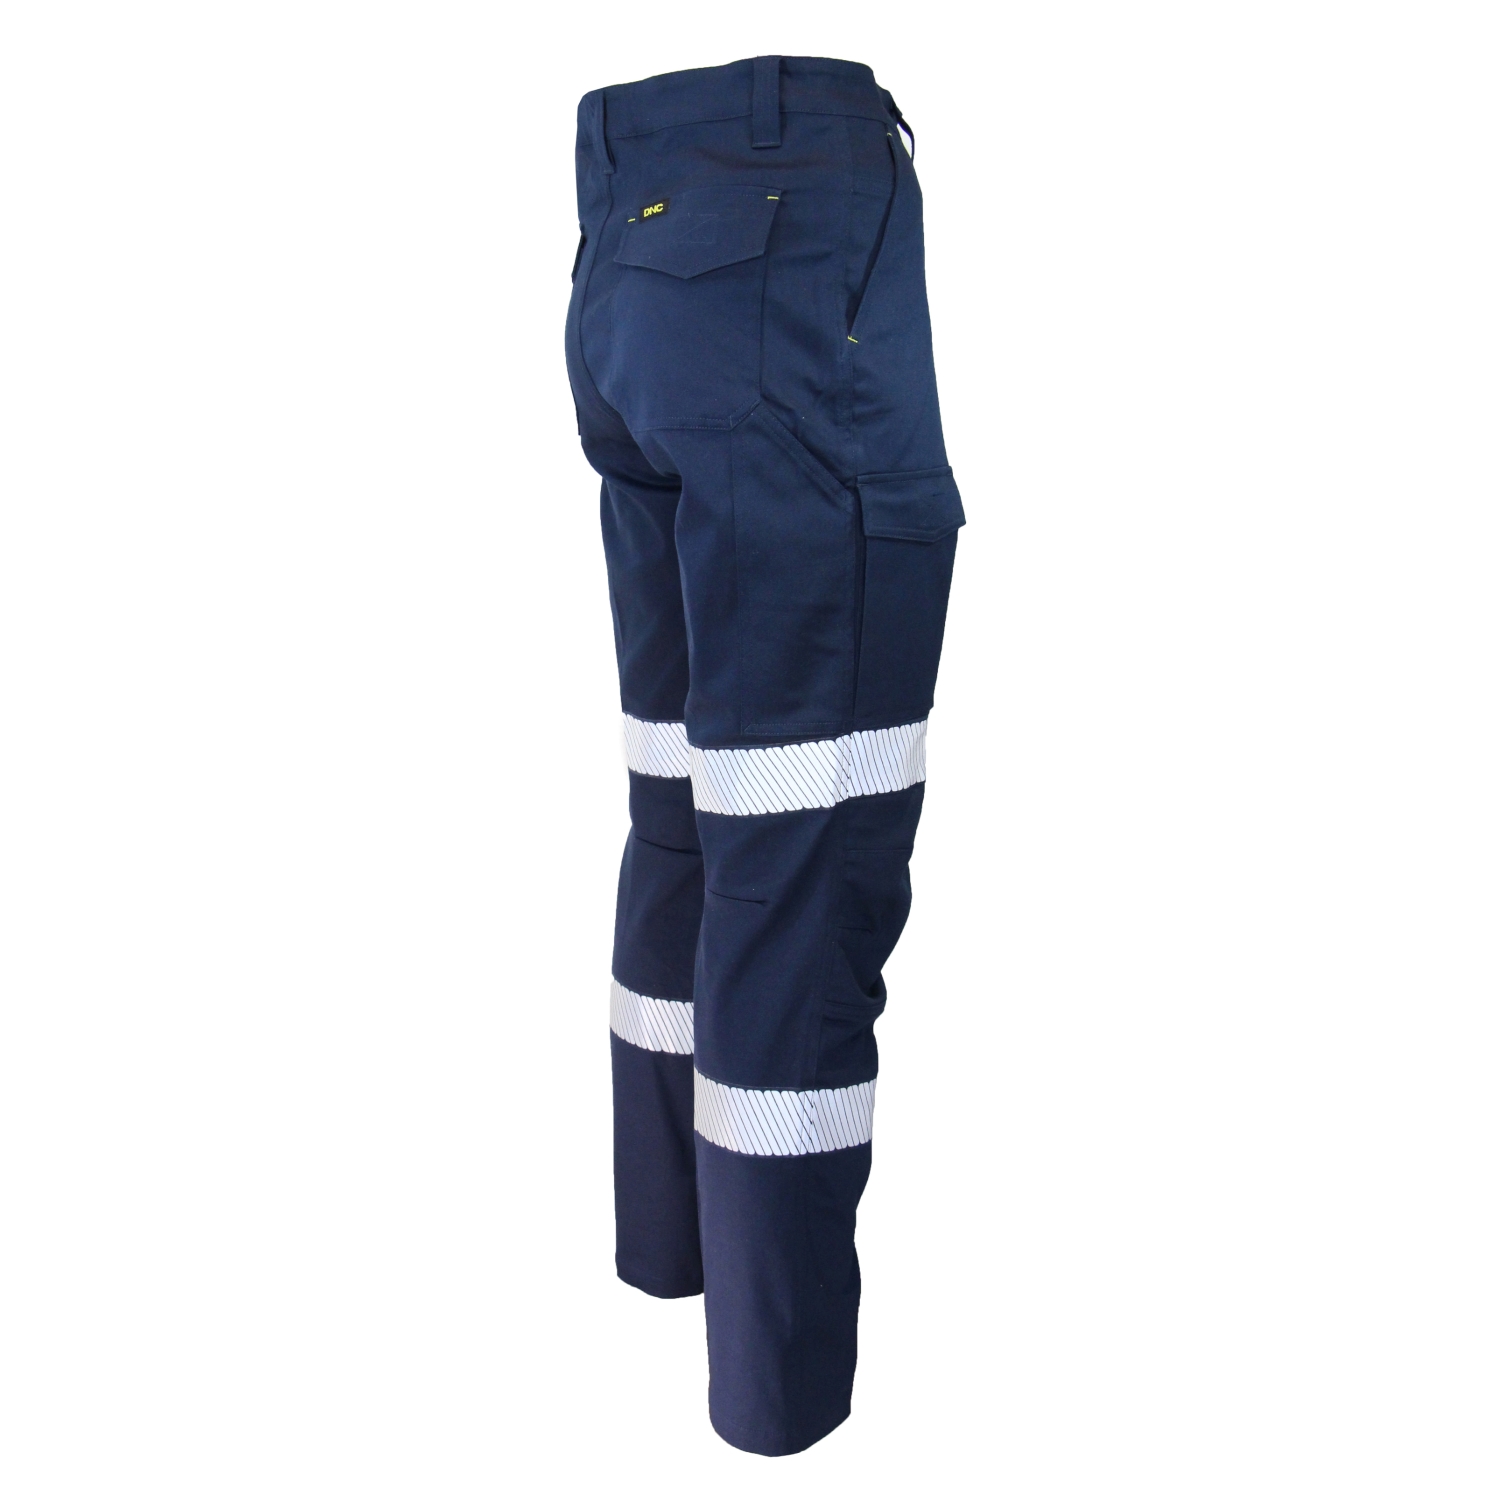 DNC Workwear HeavyWeightDrill Action Back Overall Double Layers Knee Stout Size 